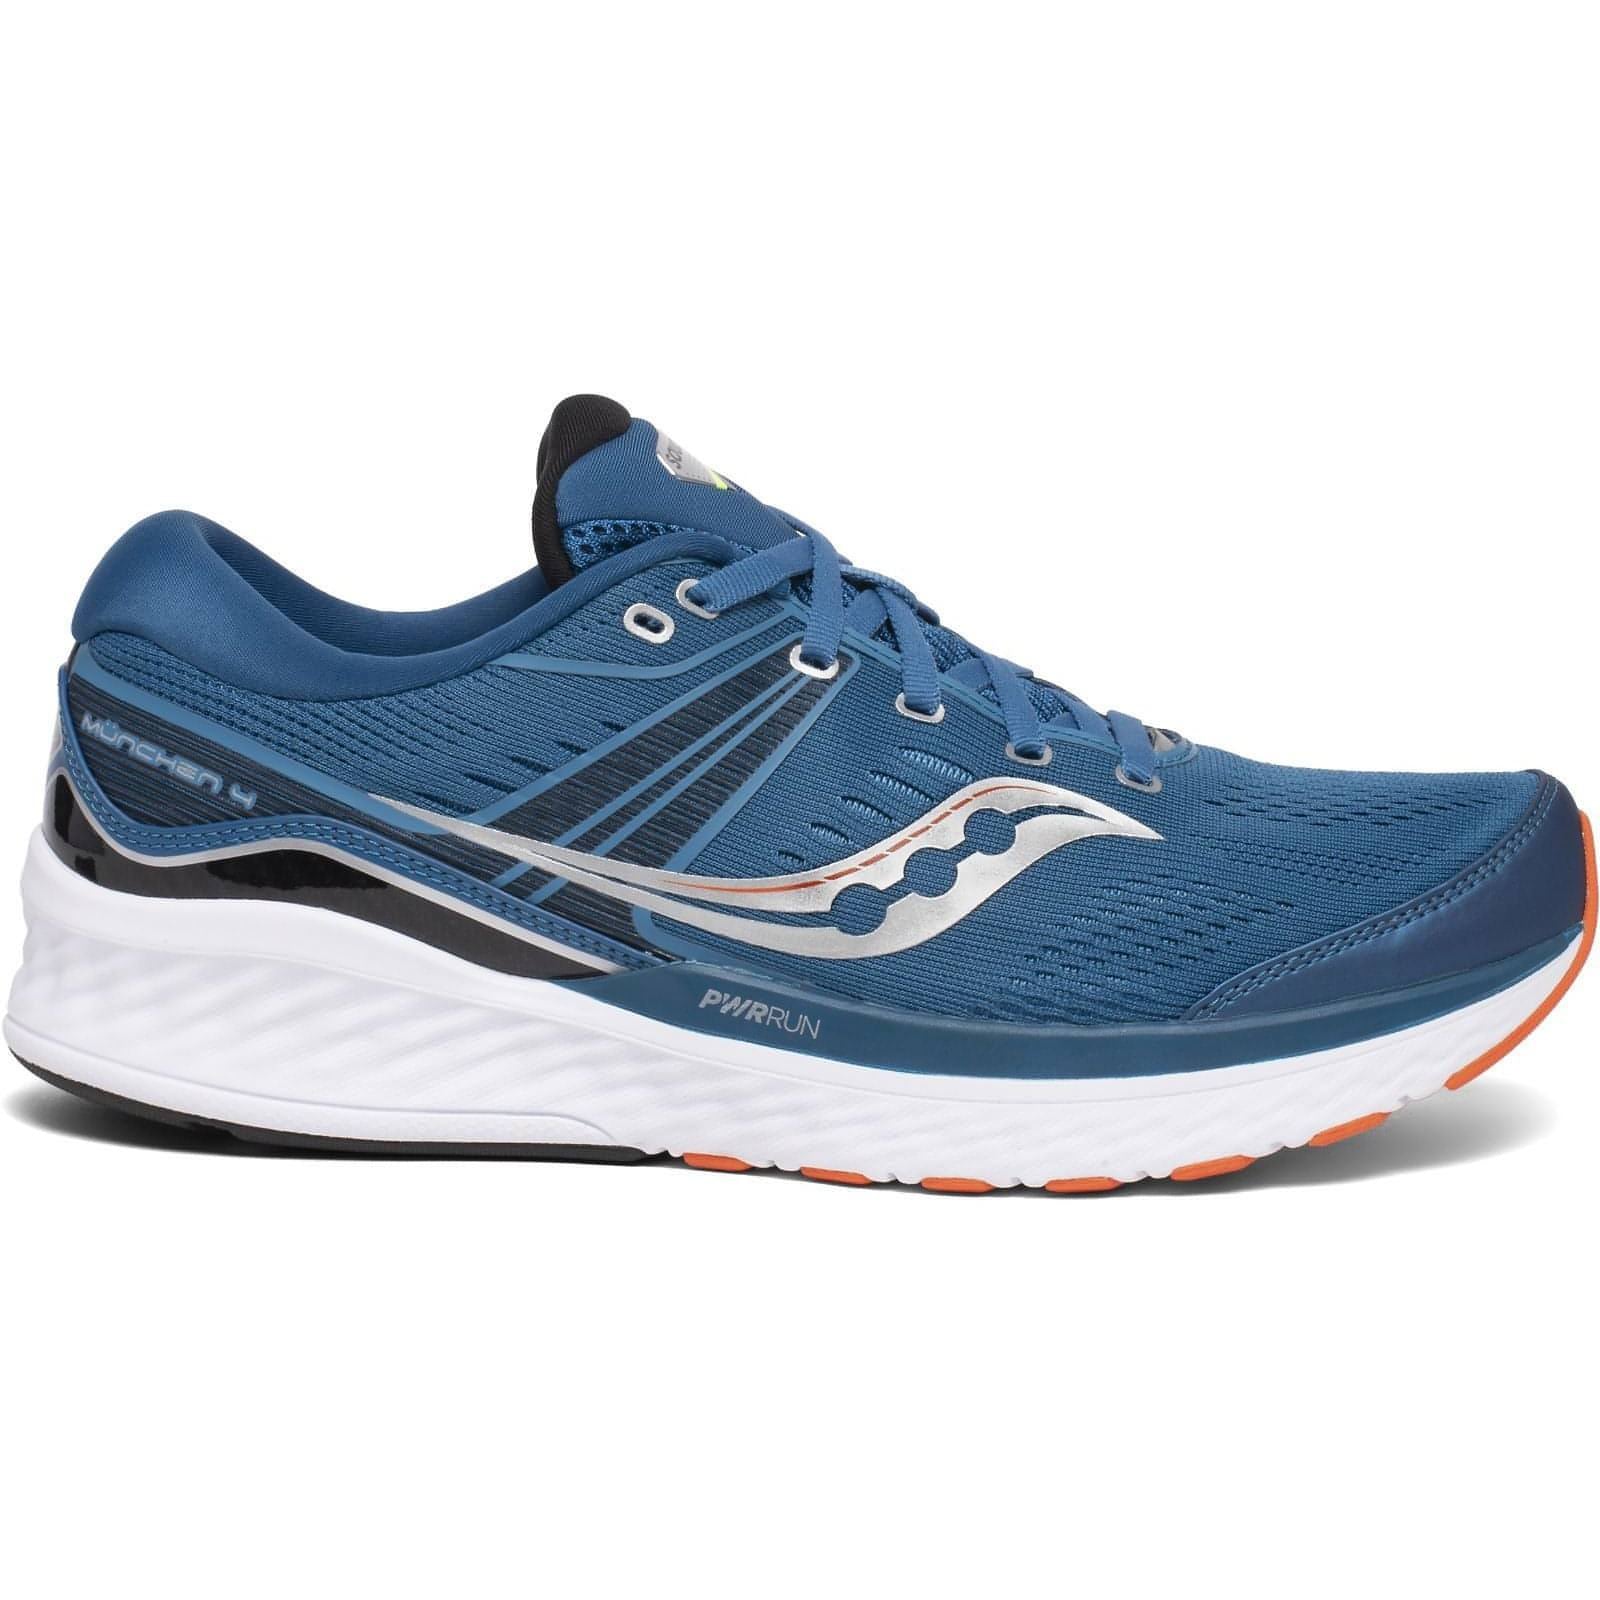 Saucony | Next Day UK Delivery | Start Fitness